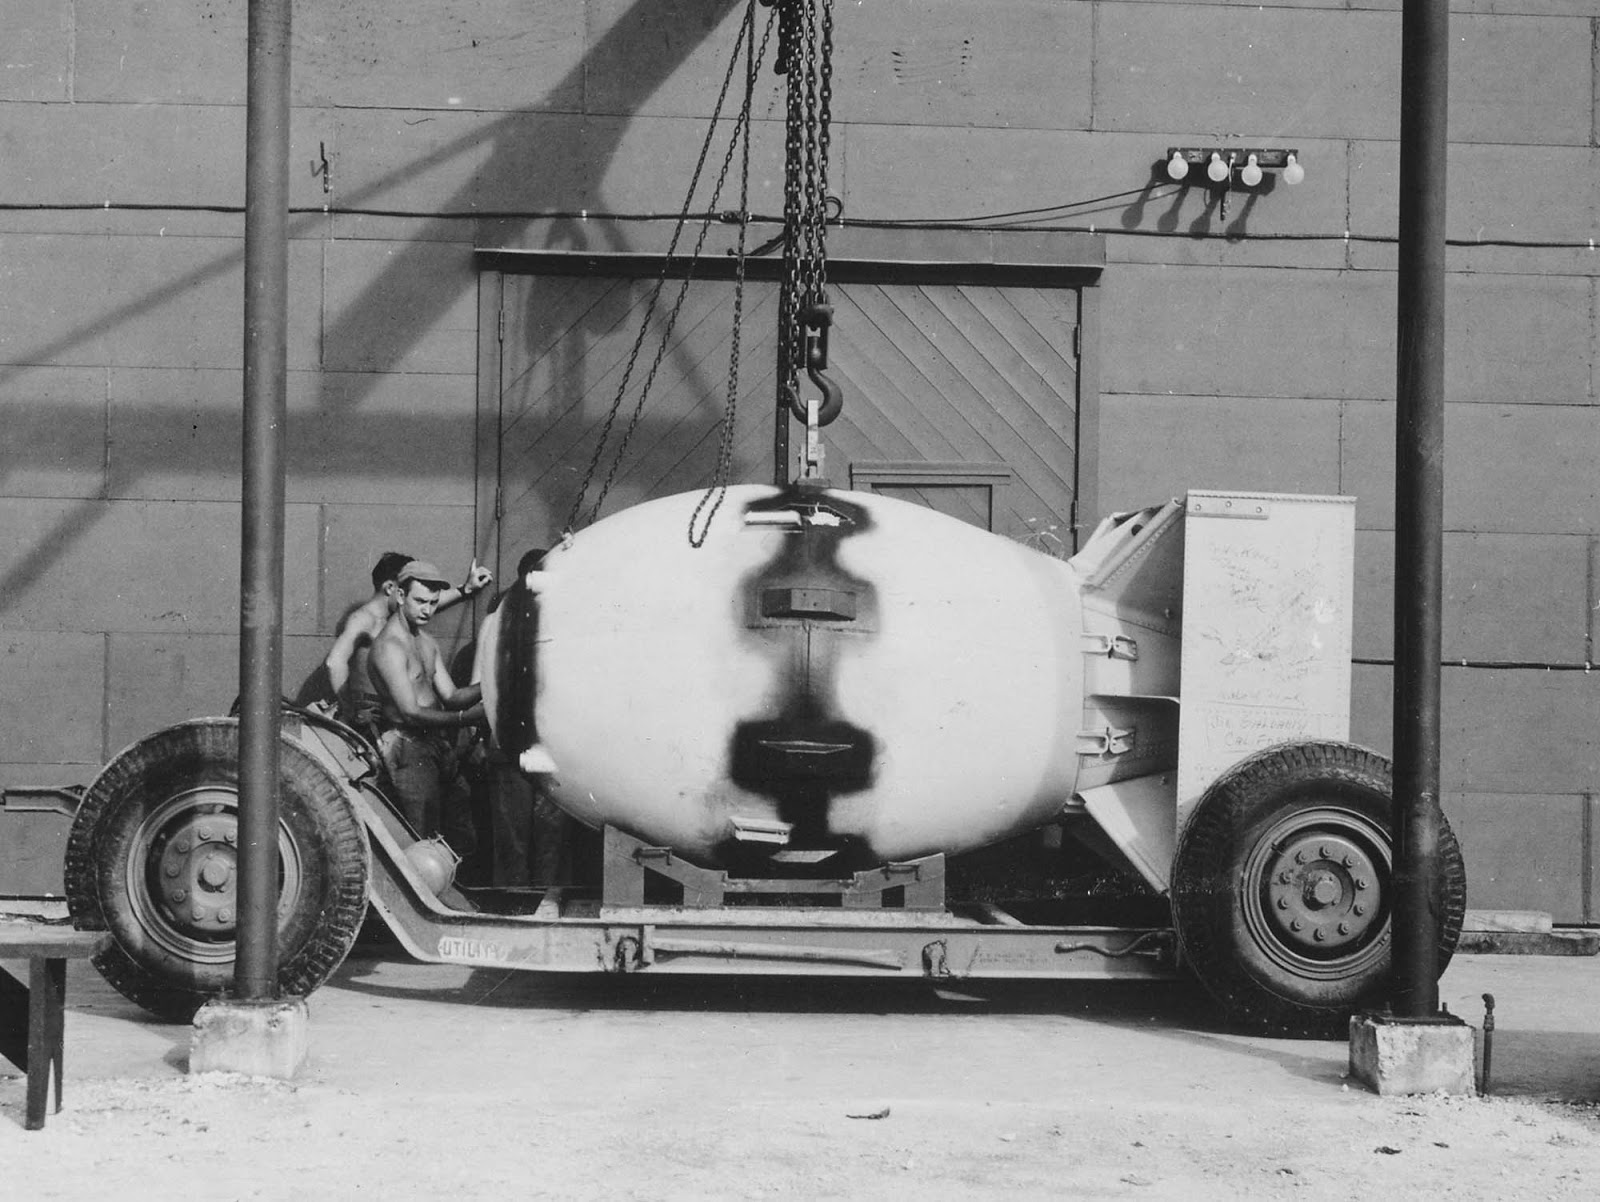 Fat Man on its transport carriage, with liquid asphalt sealant applied over the casing's seams. Tinian Island, 1945.